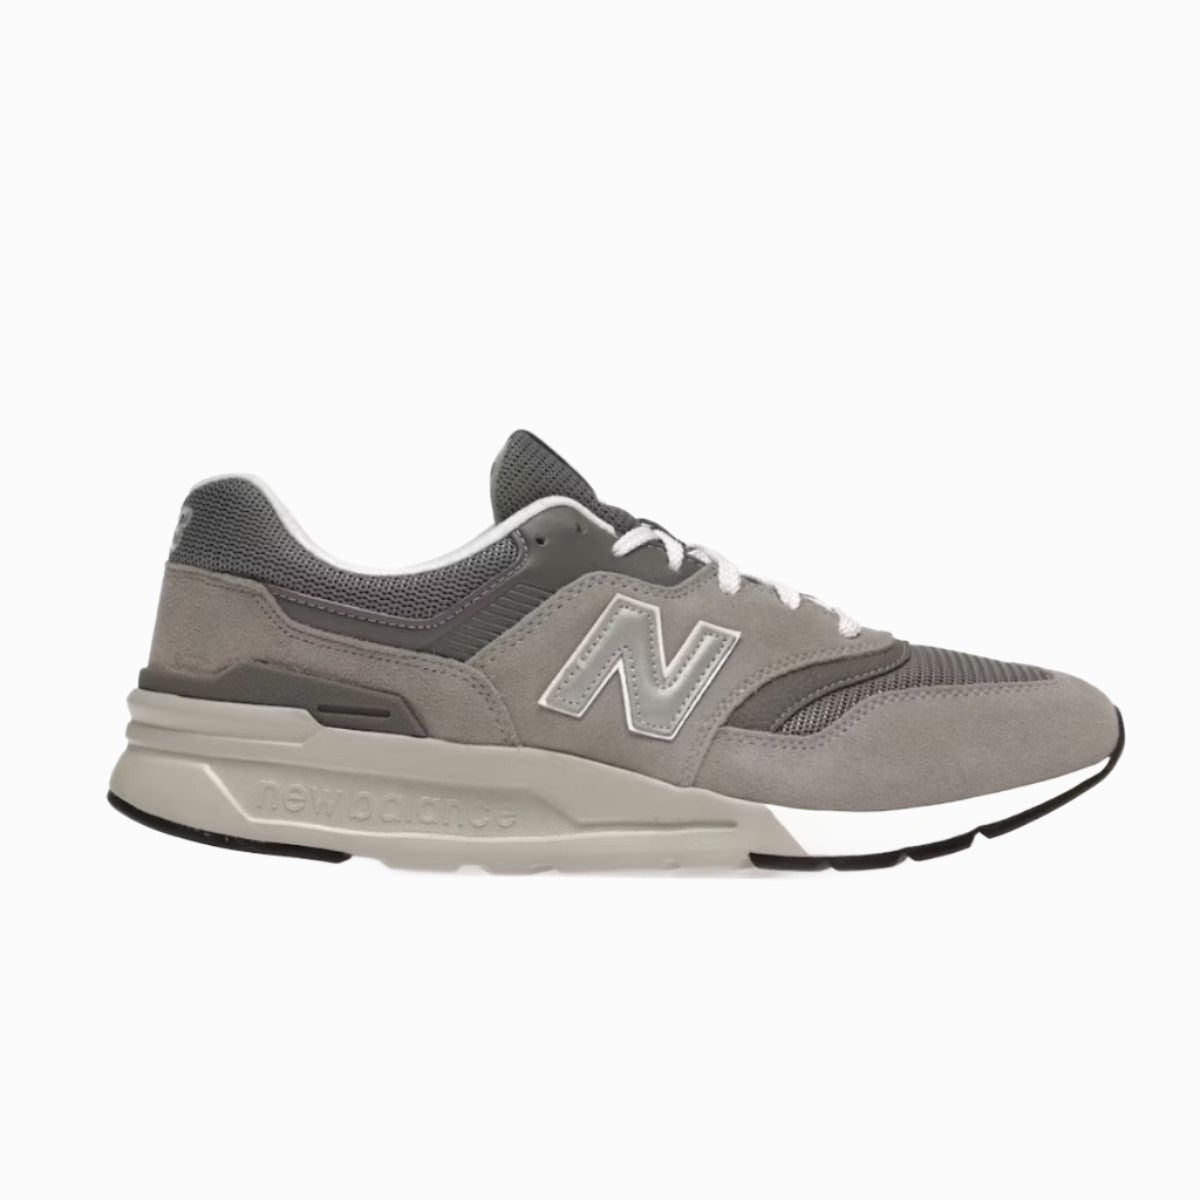 New Balance 997 Replacement Shoelaces